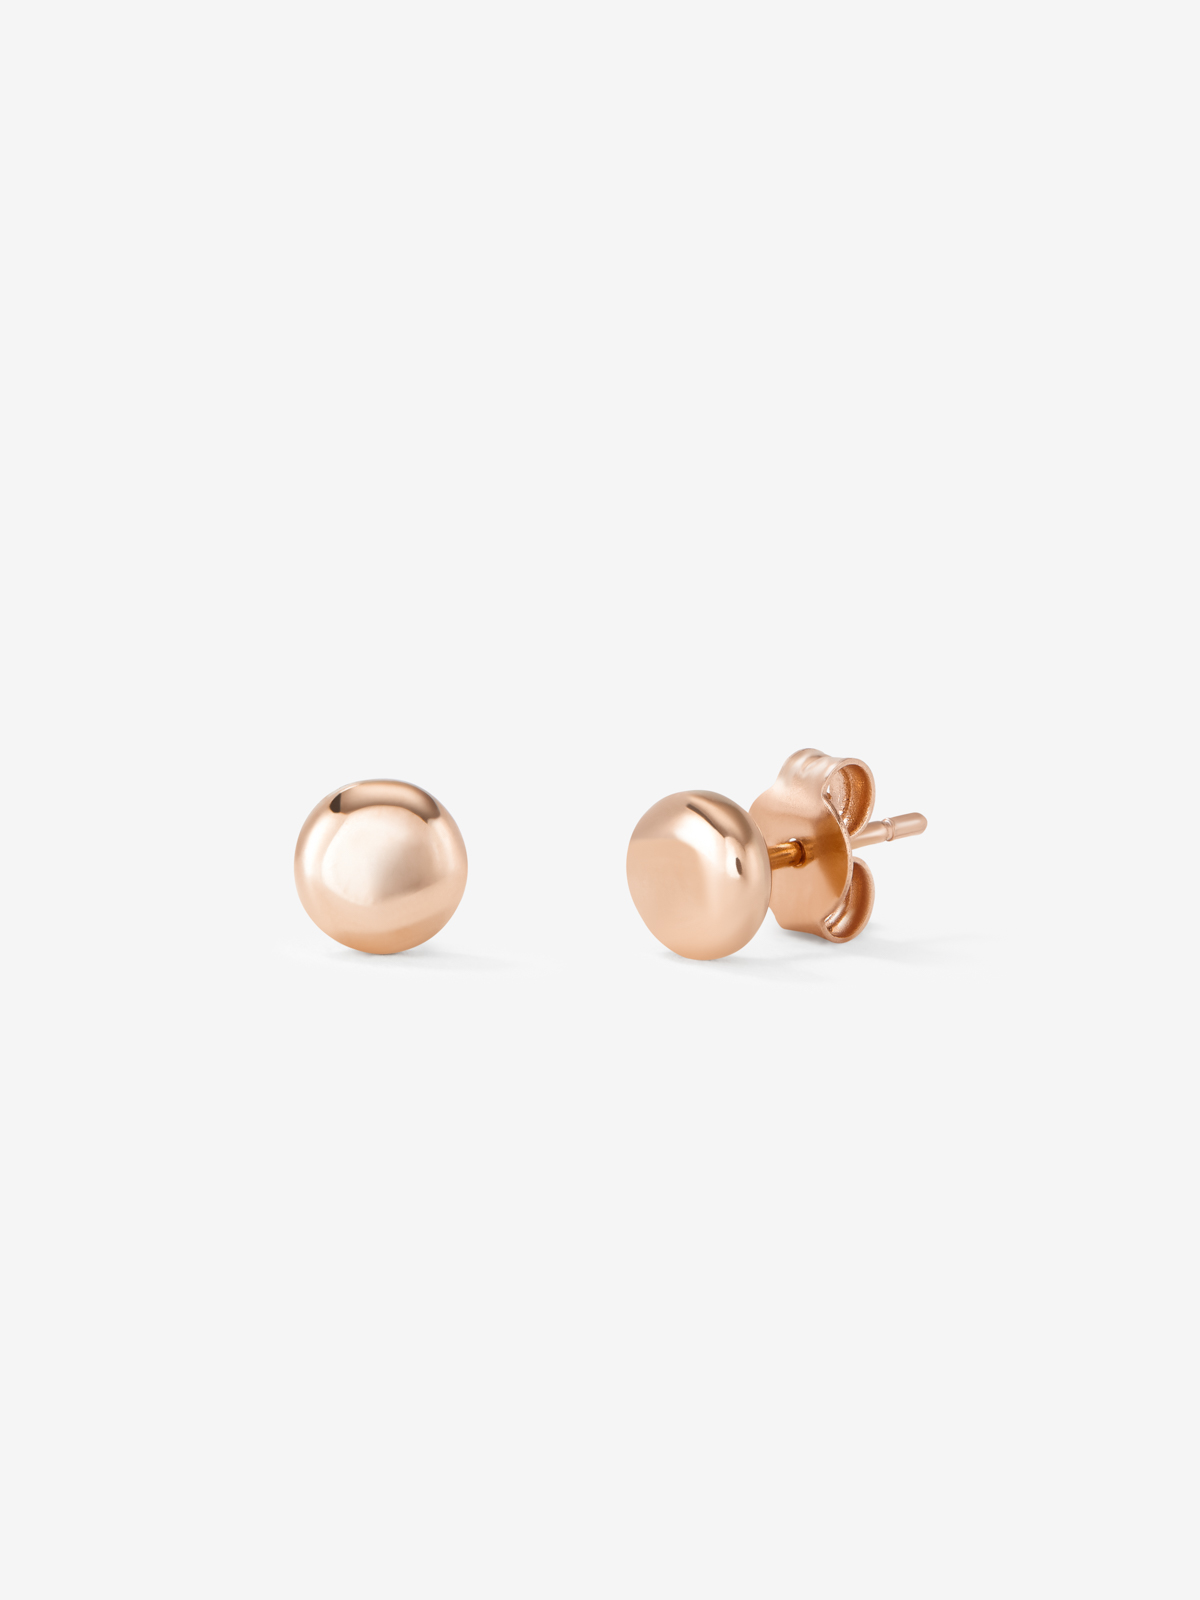 Small 18K rose gold button earrings